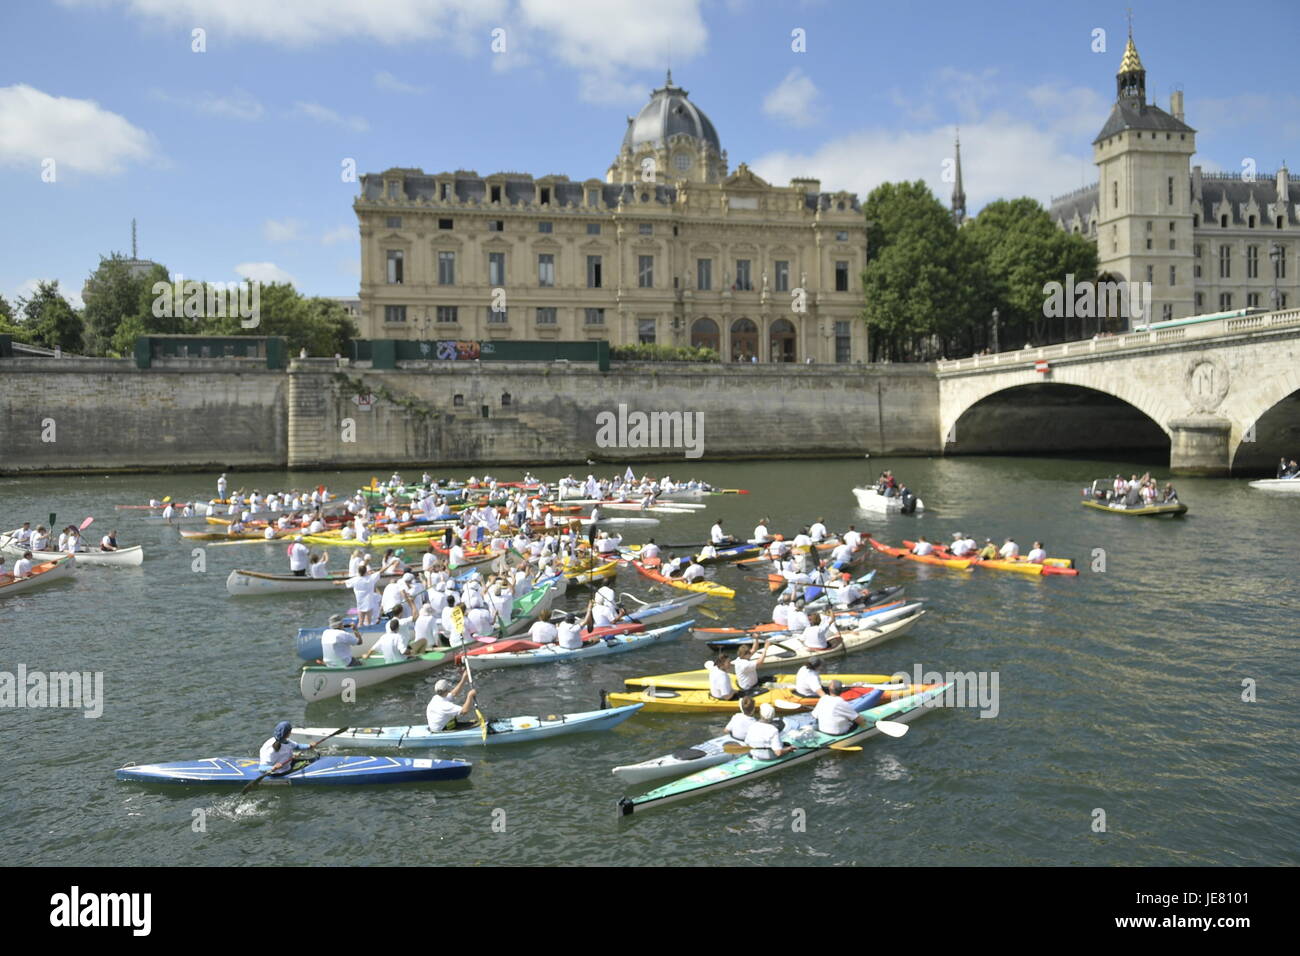 Julien Mattia / Le Pictorium -  Paris celebrates Olympism  -  23/06/2017  -  France / Paris  -  Canoeing on the Seine. A few weeks before the Olympic and Paralympic Games were awarded by the International Olympic Committee (IOC) in 2024, Paris is more than ever mobilized around its candidacy and organized two days where the heart of Paris transformed itself into an ephemeral Olympic park. Stock Photo